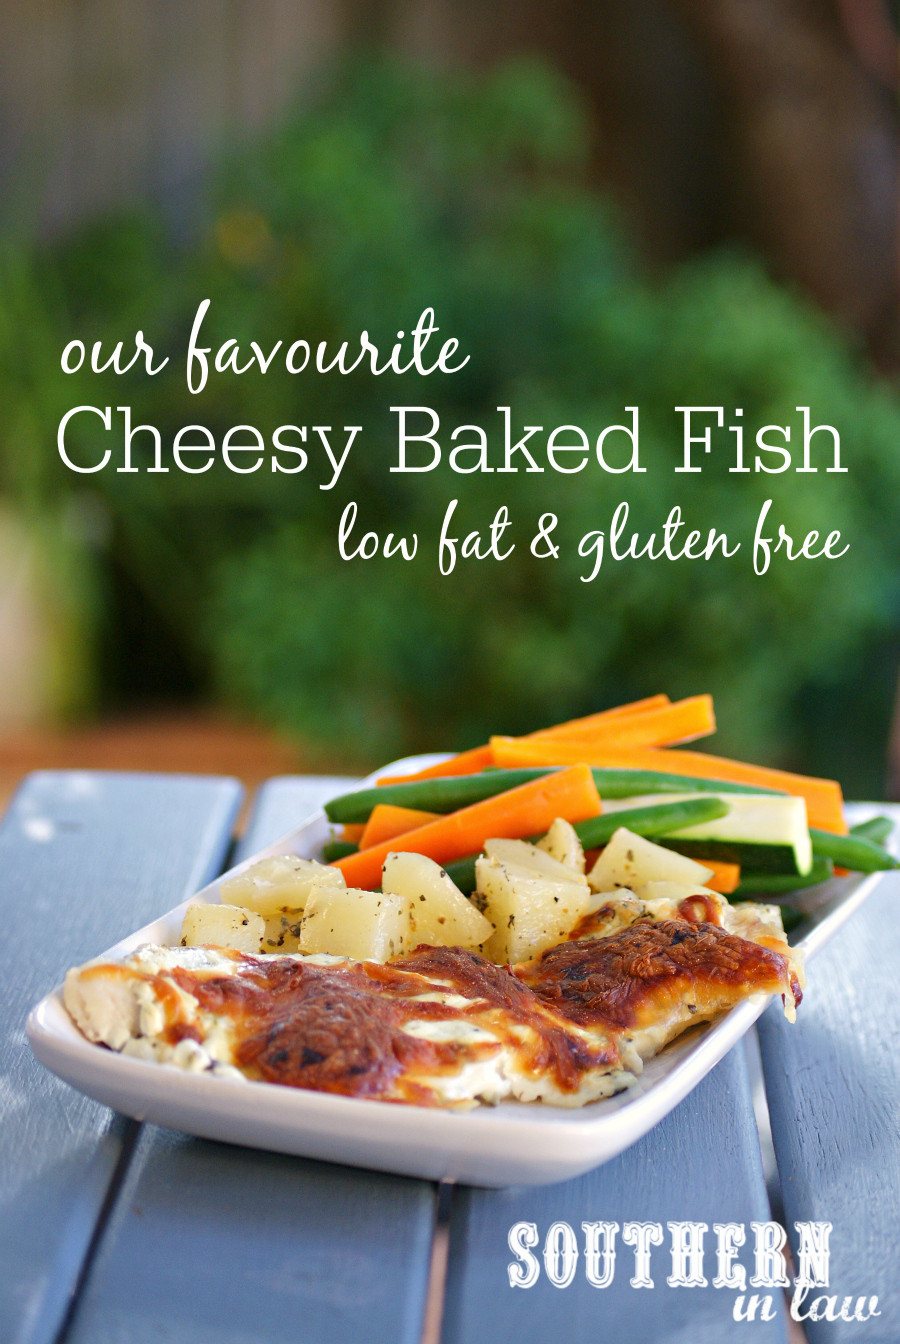 Fish Recipes Healthy
 Southern In Law Recipe Our Favourite Cheesy Baked Fish